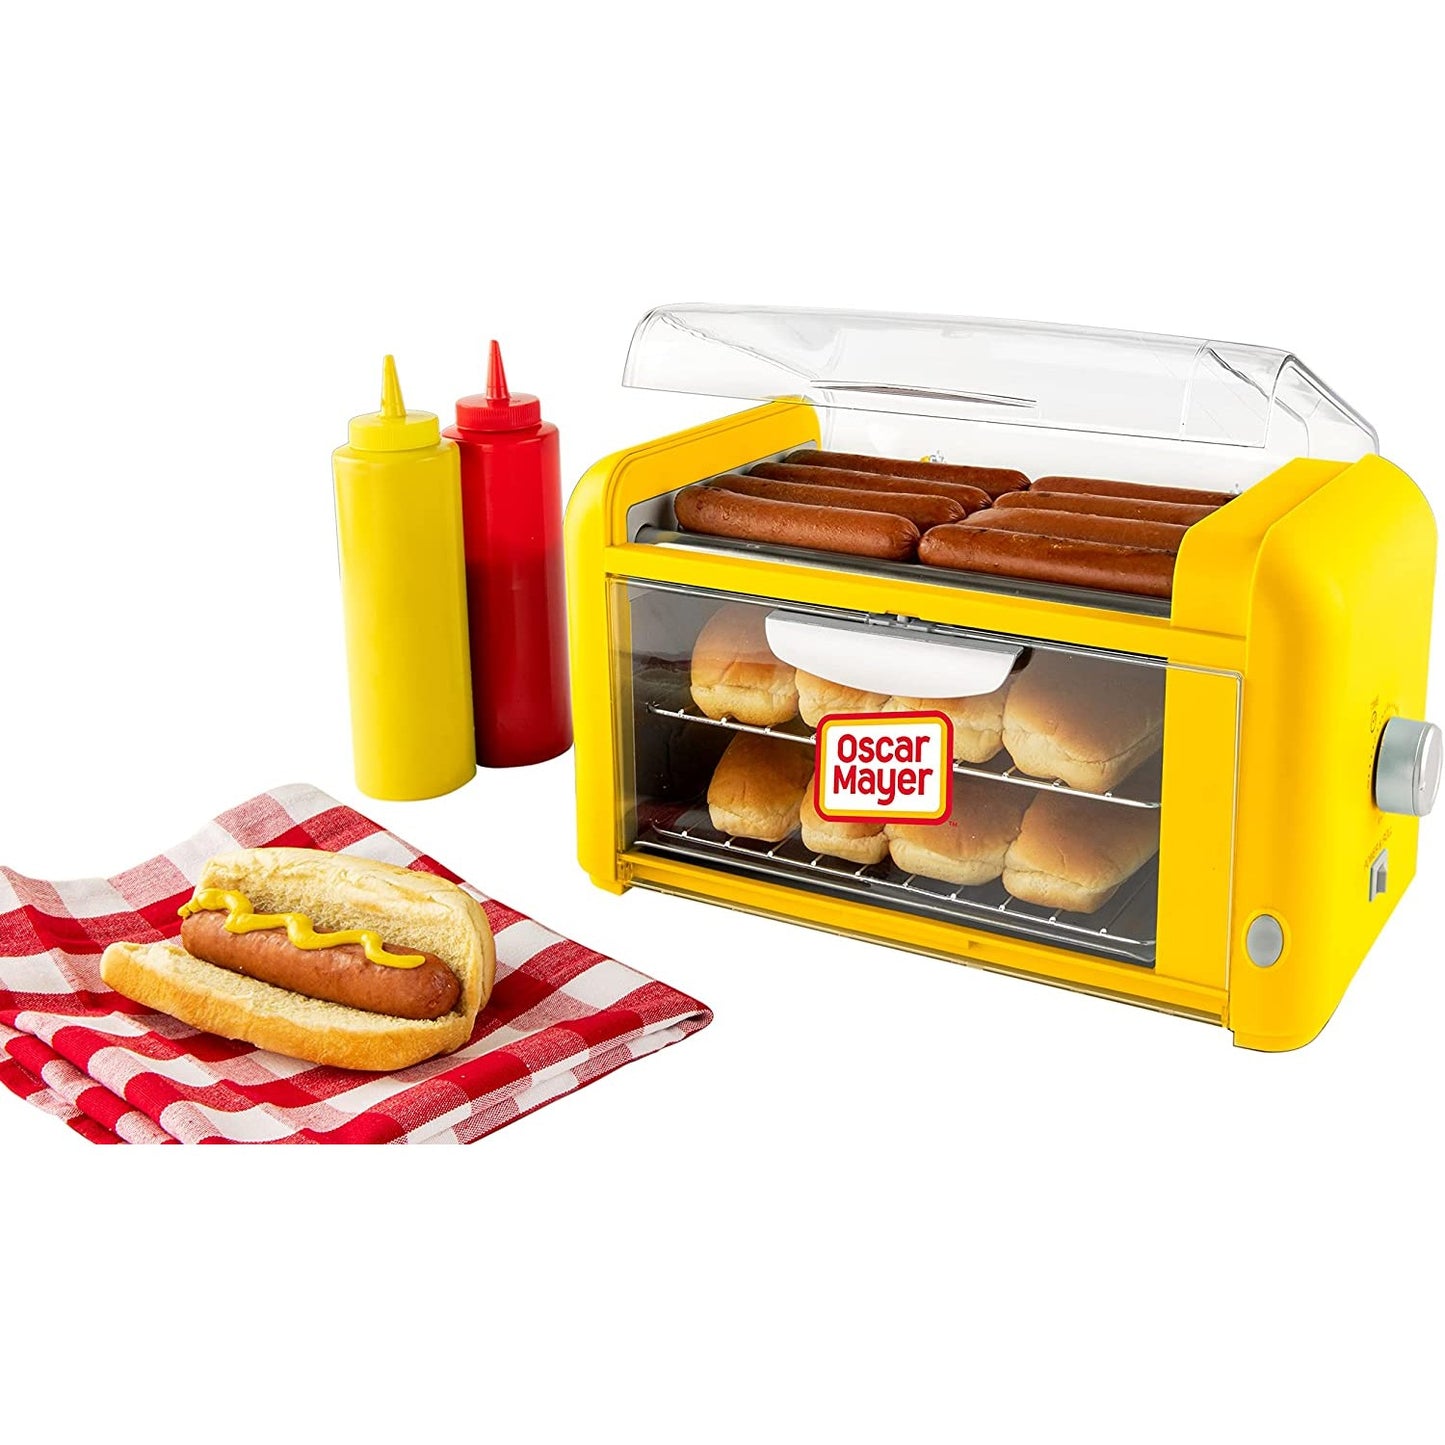 A hot dog toaster oven filled with sausages and buns. Nearby there are two bottles of sauce and a cooked hot dog on a napkin.